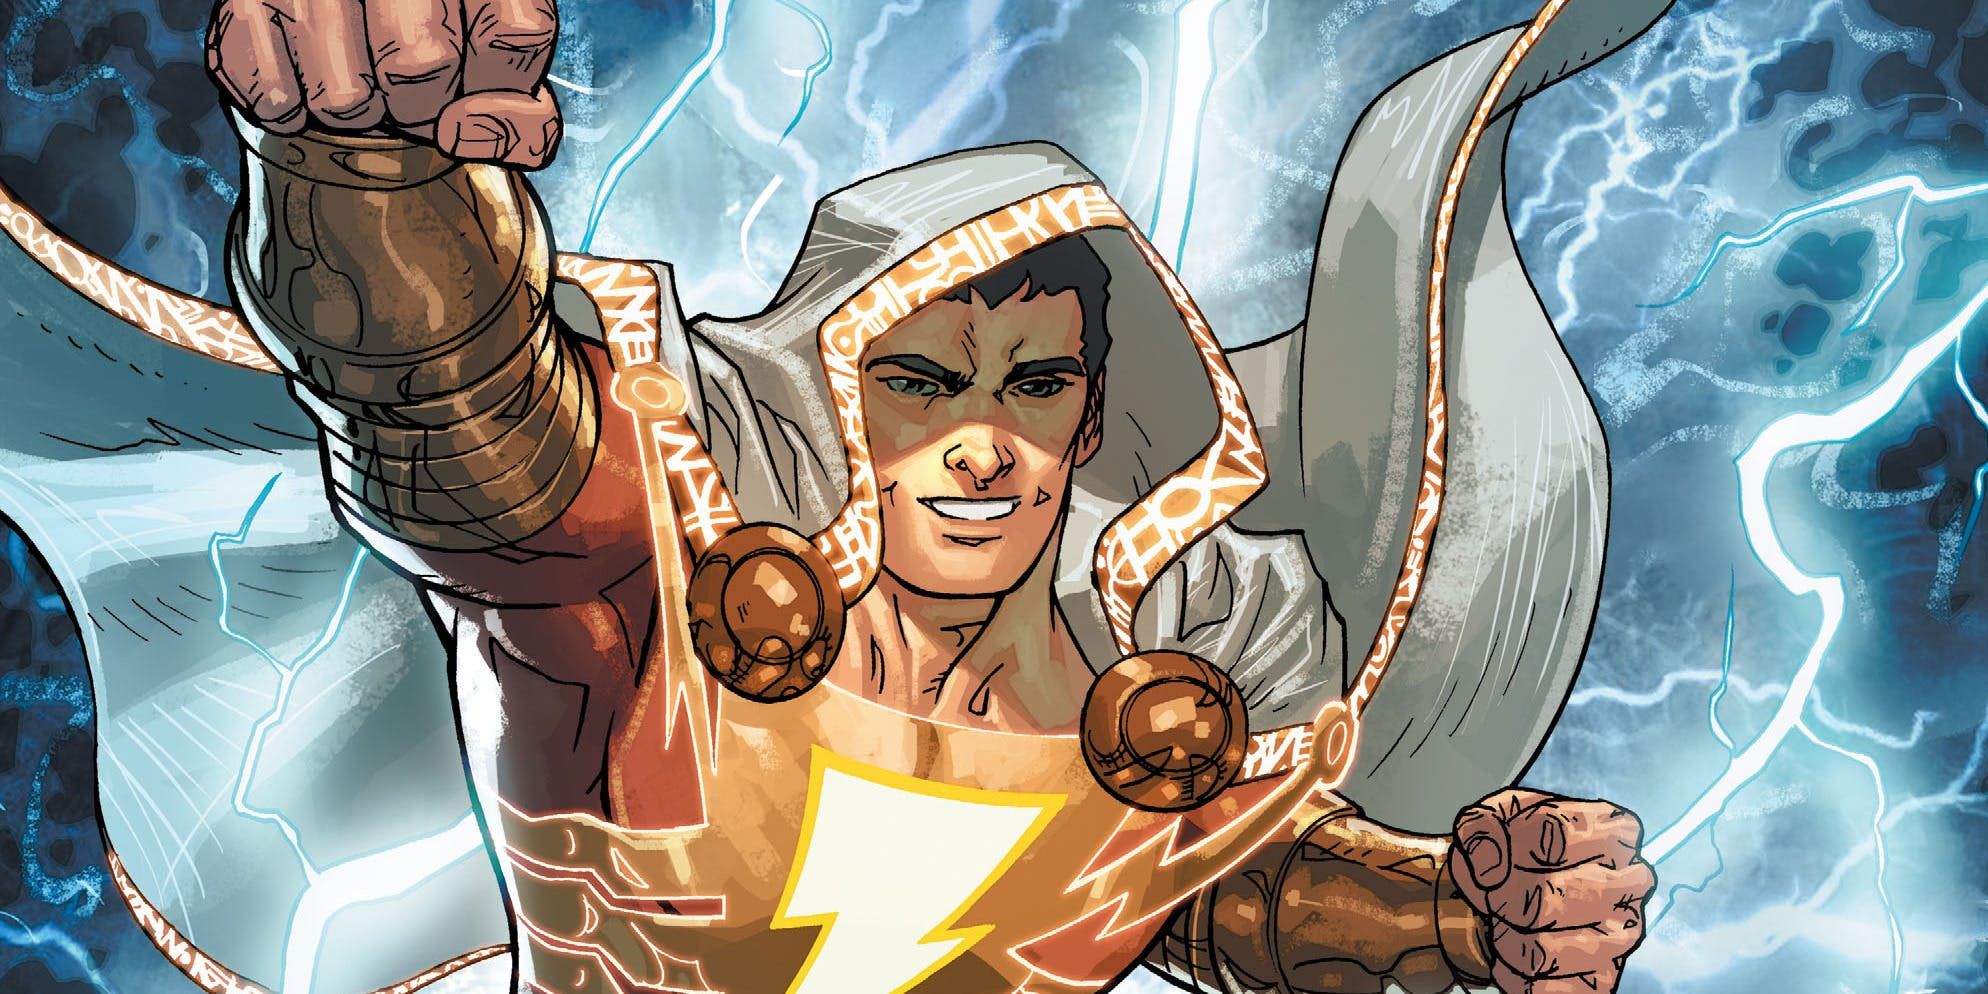 Shazam S Closest Allies And Greatest Enemies Ranked From Strongest To Weakest